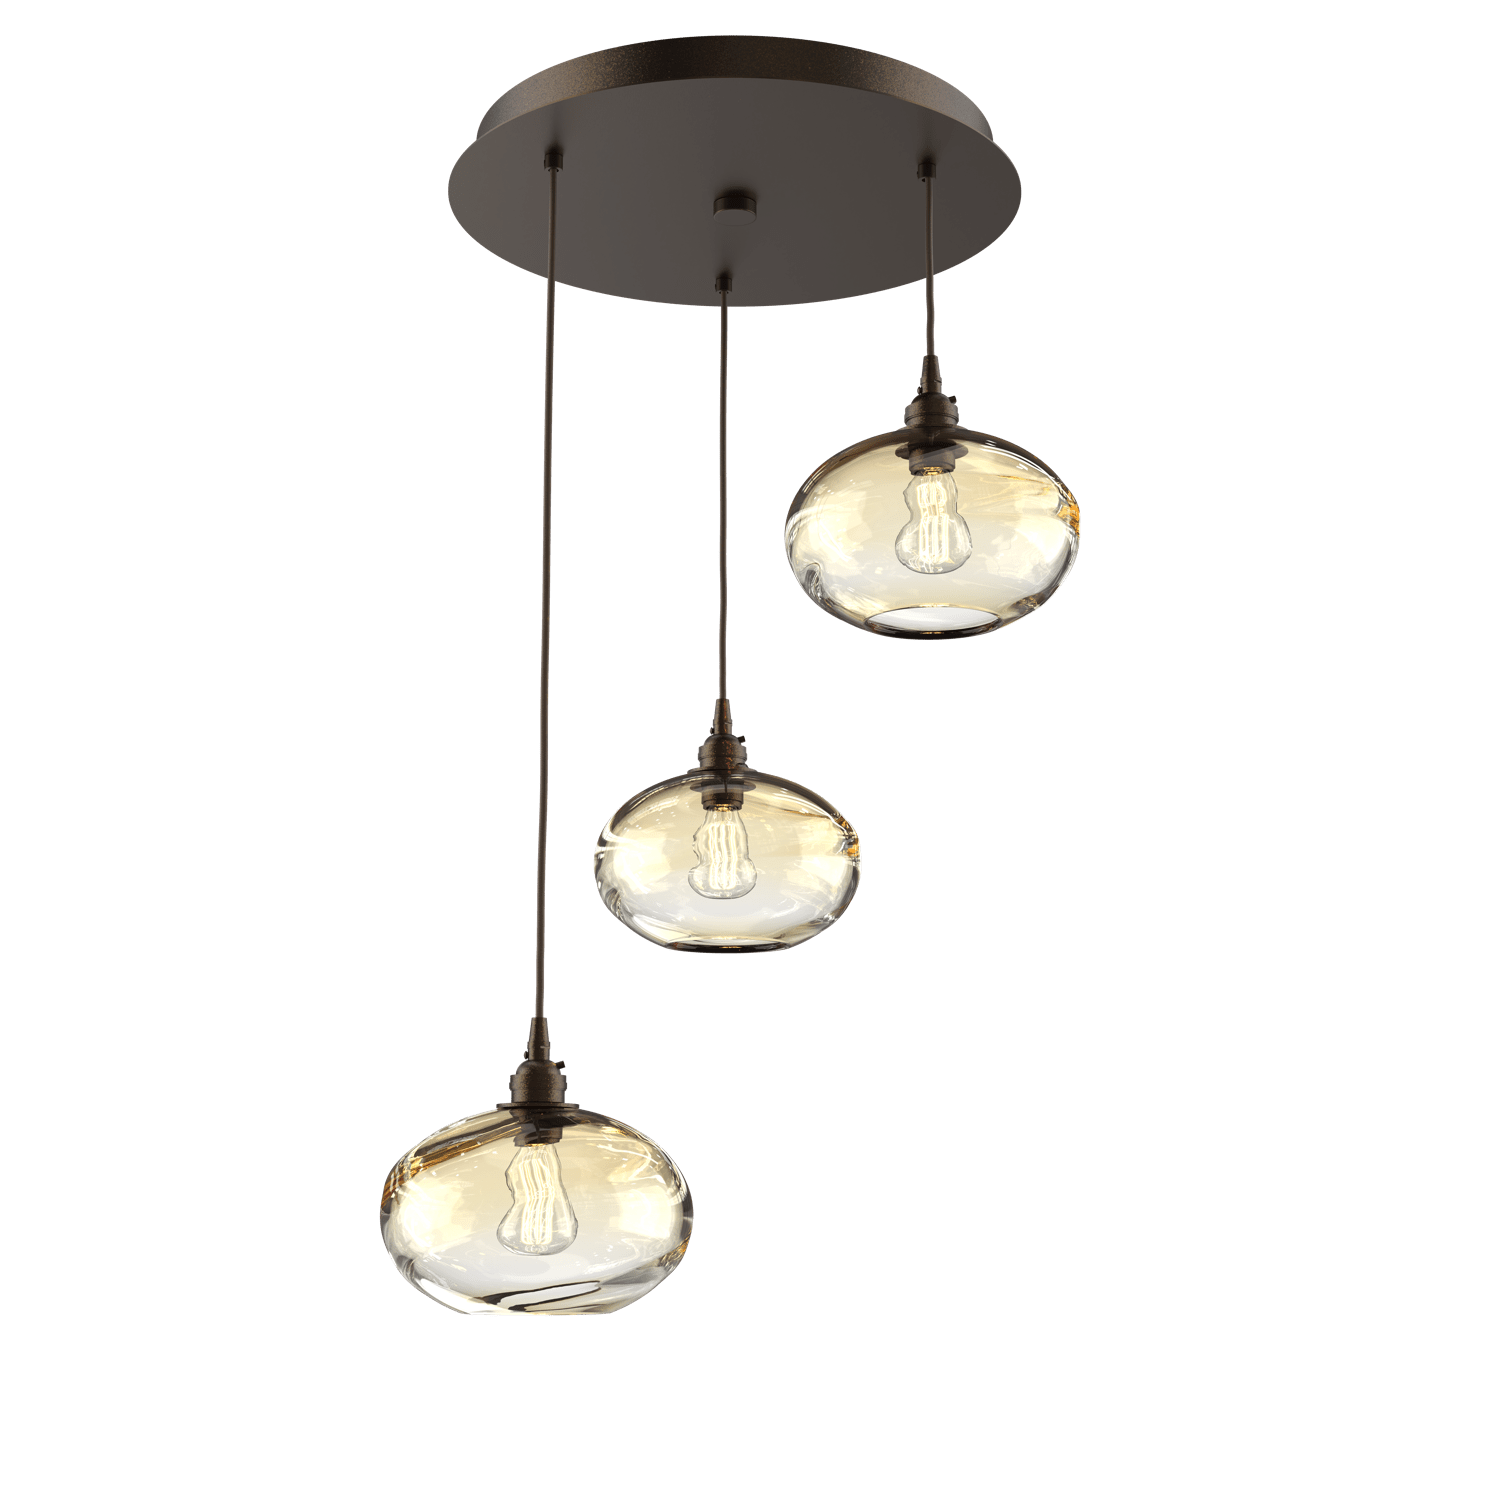 CHB0036-03-FB-OA-Hammerton-Studio-Optic-Blown-Glass-Coppa-3-light-round-pendant-chandelier-with-flat-bronze-finish-and-optic-amber-blown-glass-shades-and-incandescent-lamping